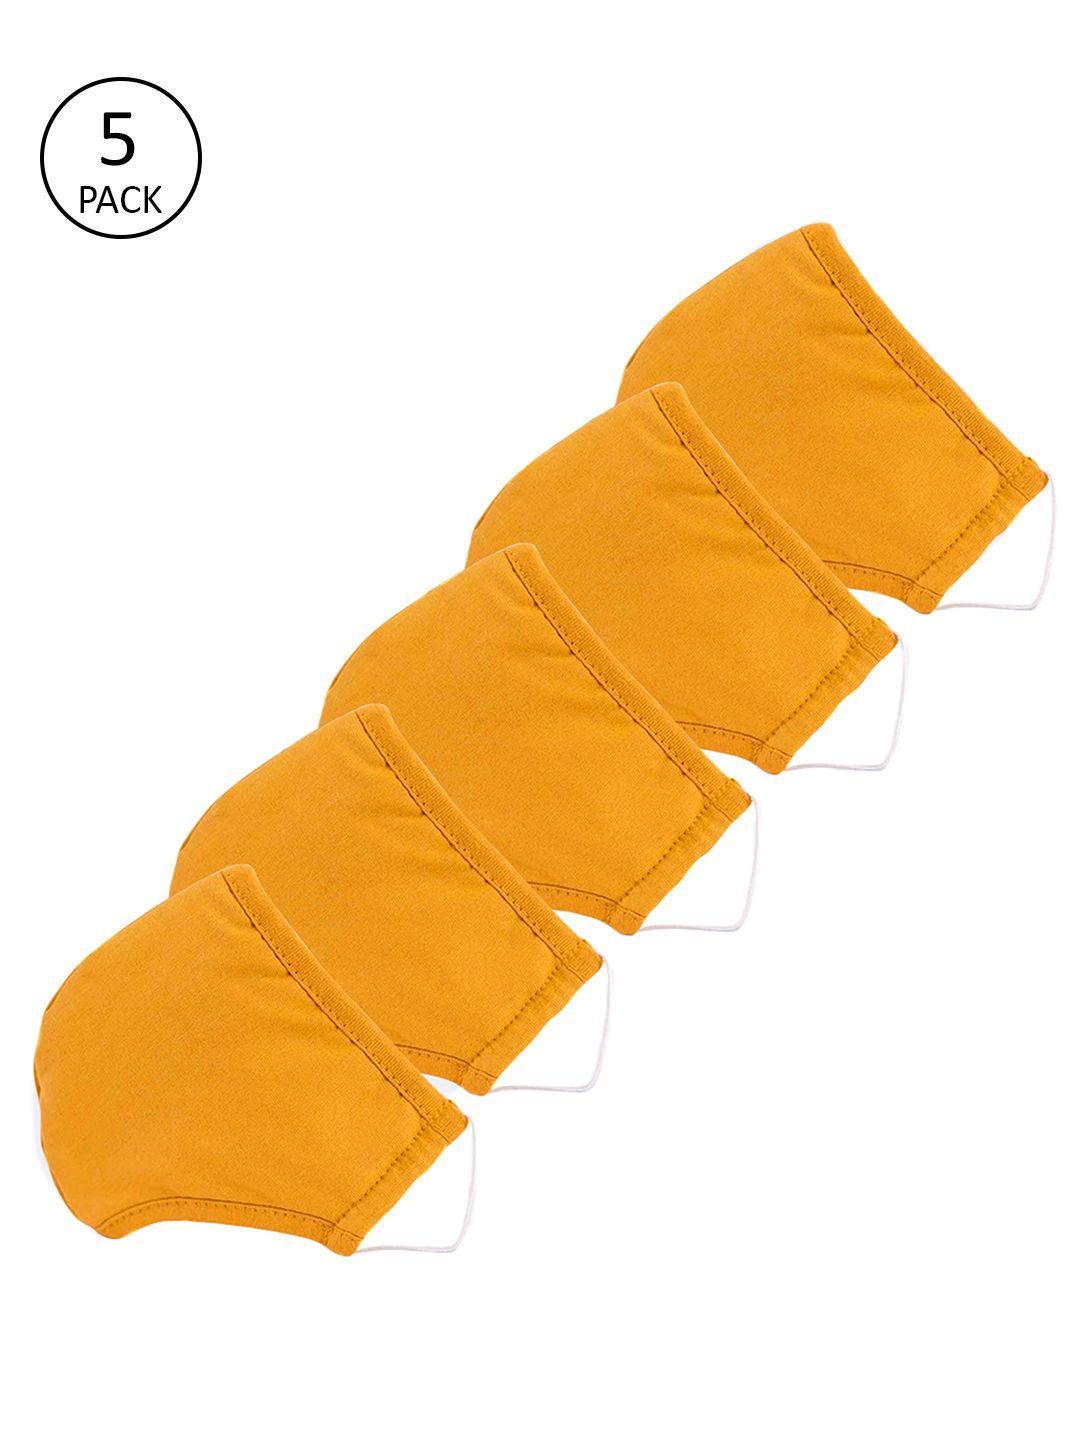 Dillinger Adults Mustard Yellow Pack of 5 Reusable 3-Layer Outdoor Masks Price in India